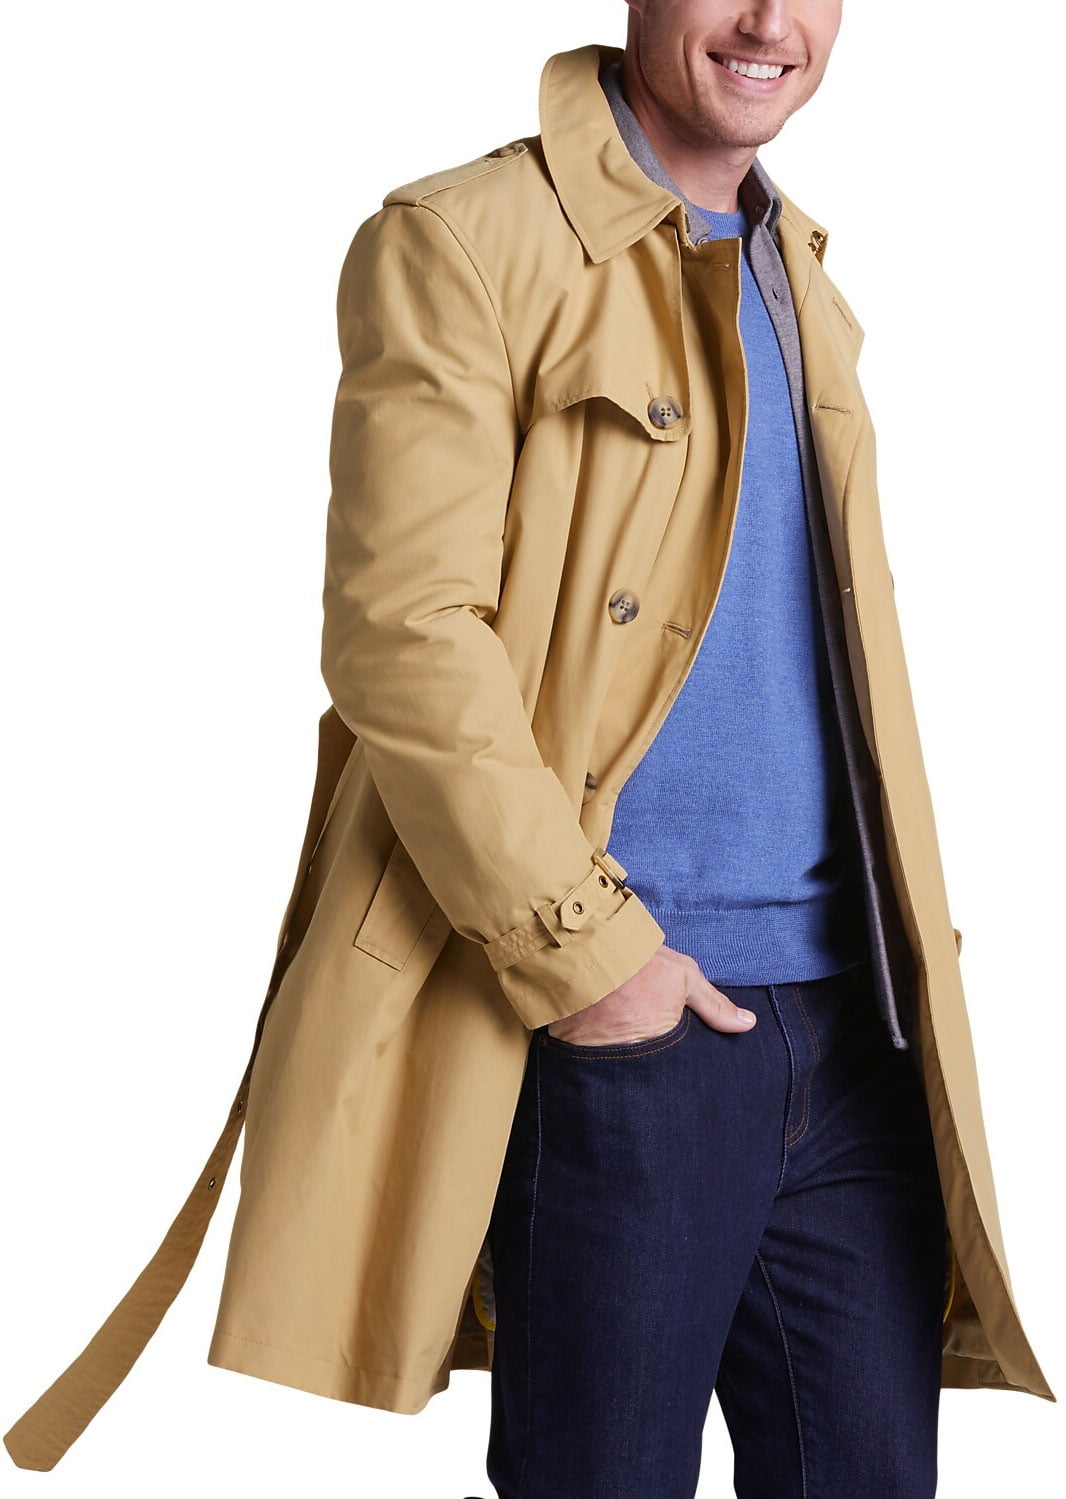 Calvin Klein Mens Double Breasted Trench Coat 44 Short Tan - NWT $395 - Walmart.com